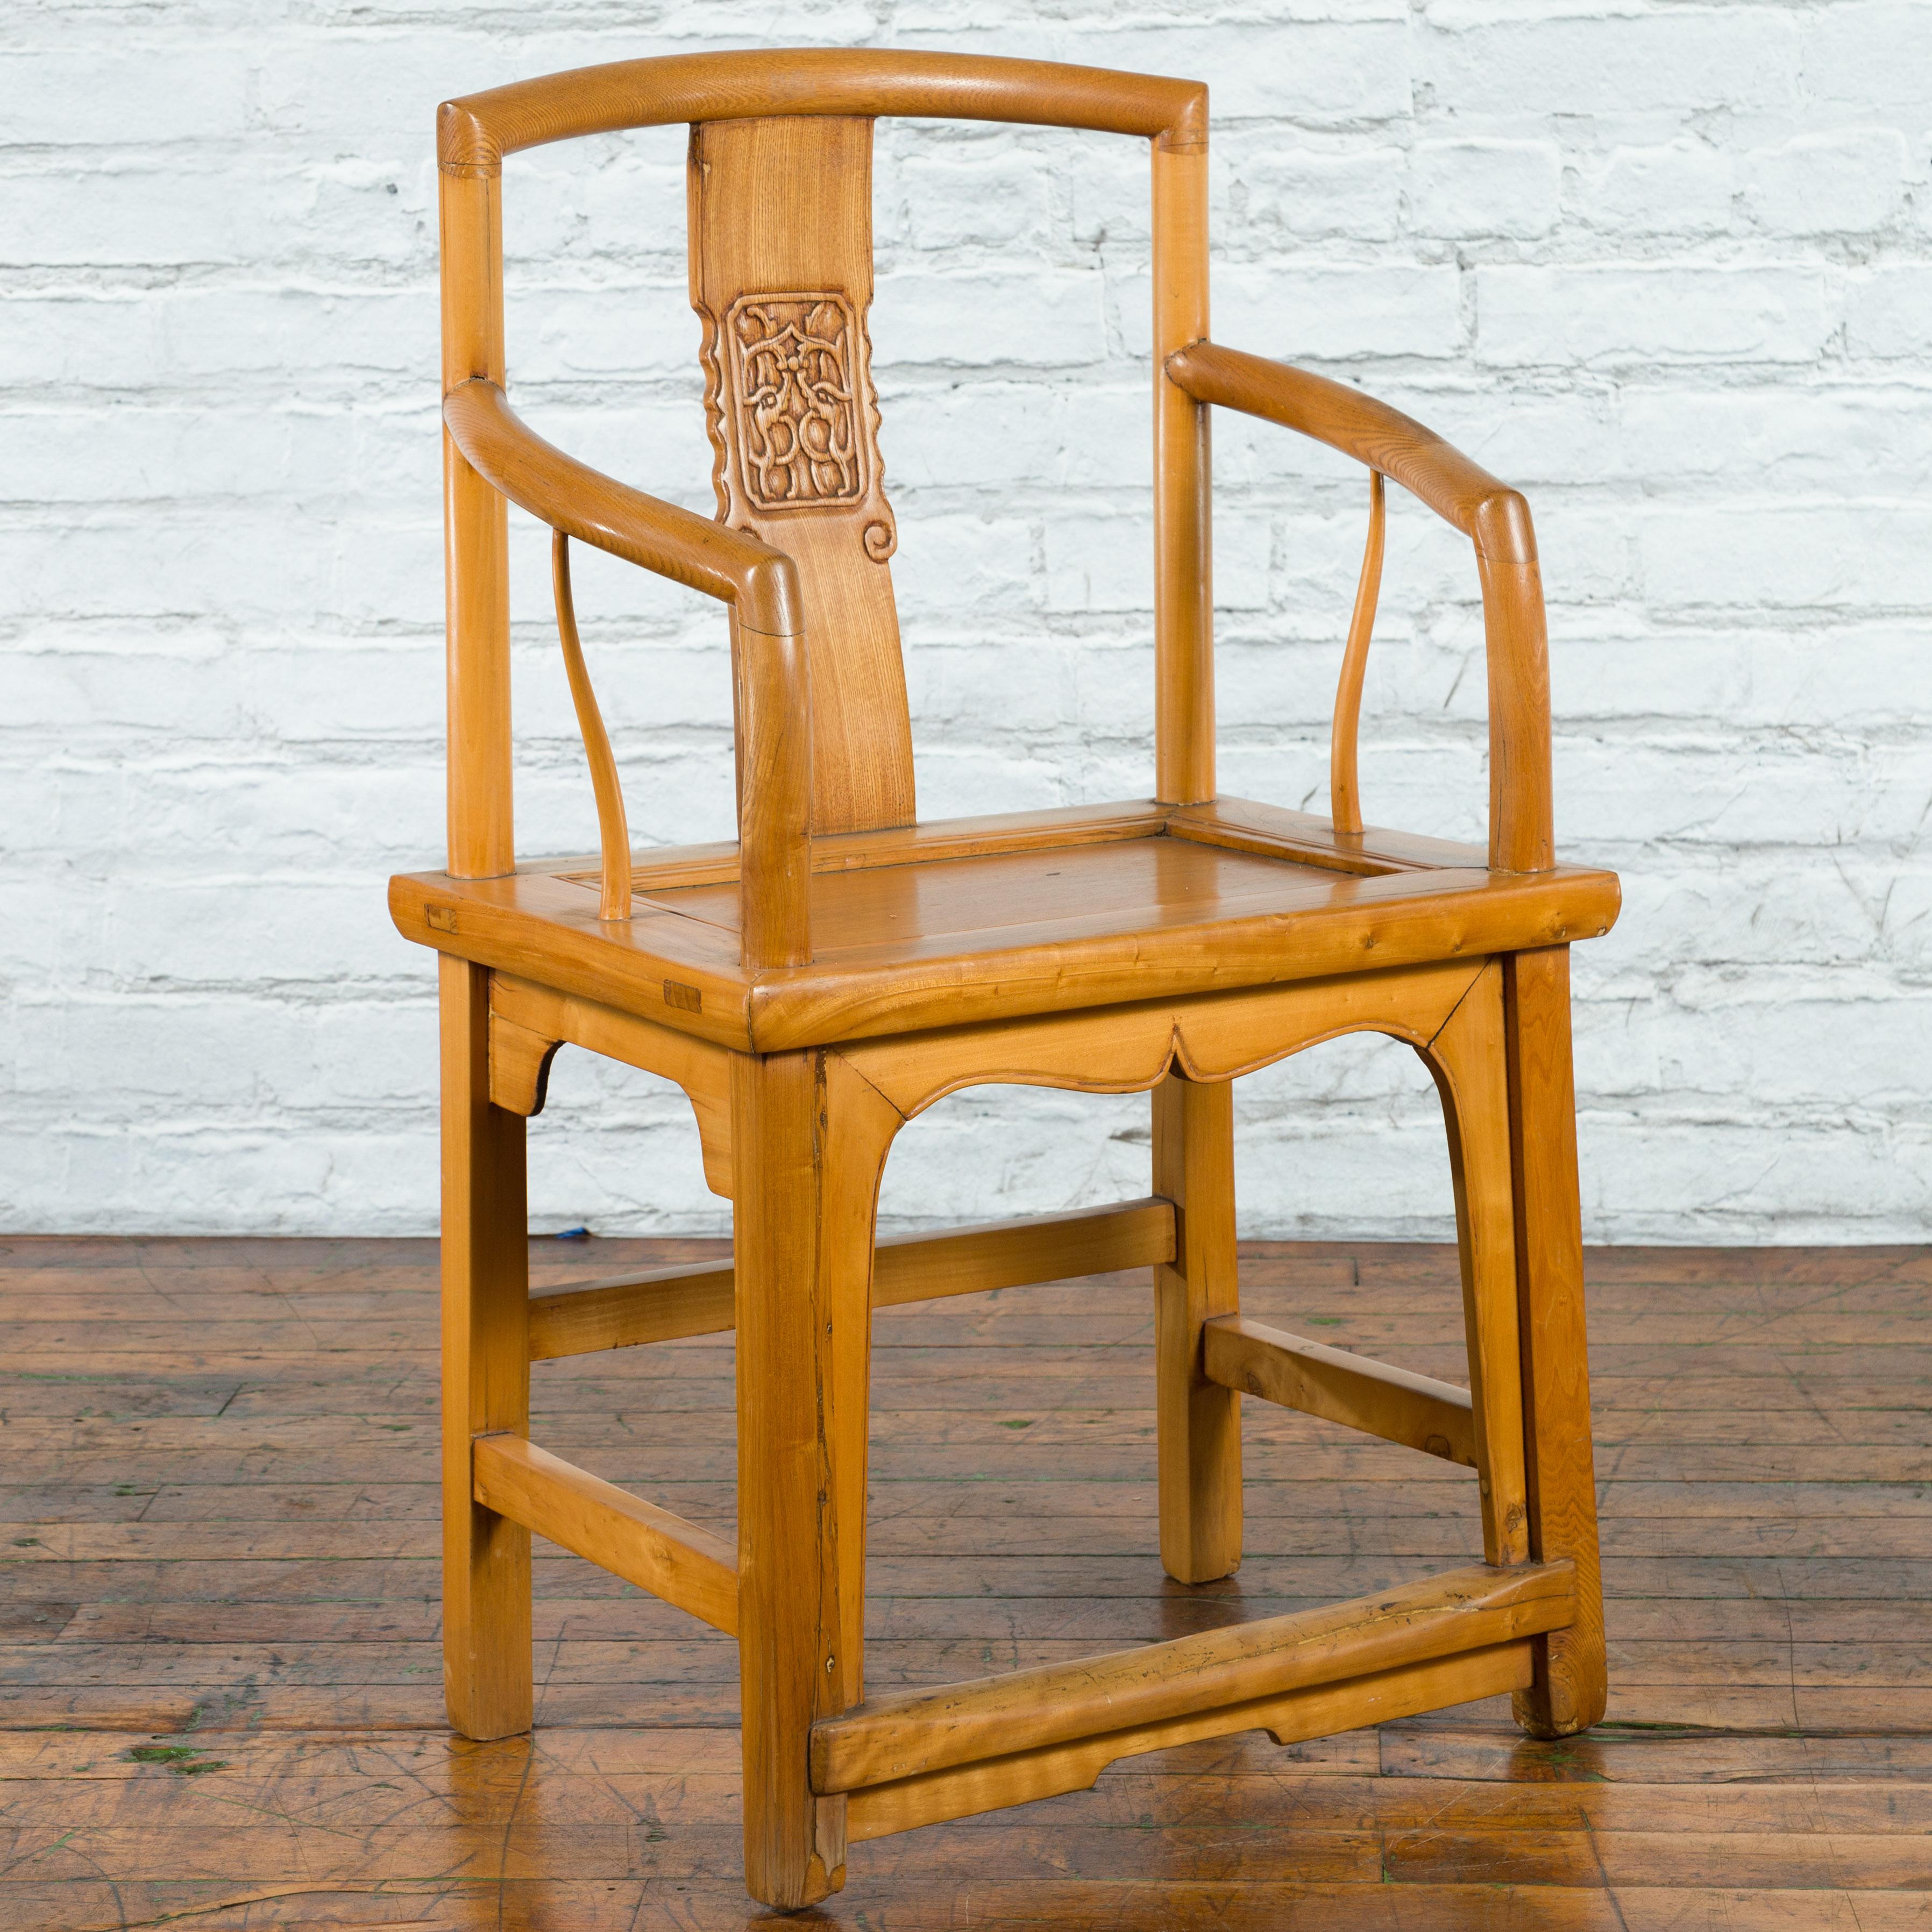 A Chinese Qing Dynasty period elm wood armchair from the 19th century, with open back, carved splat, serpentine arms, wooden seat and carved apron. Created in China during the Qing Dynasty period in the 19th century, this elm wood armchair features